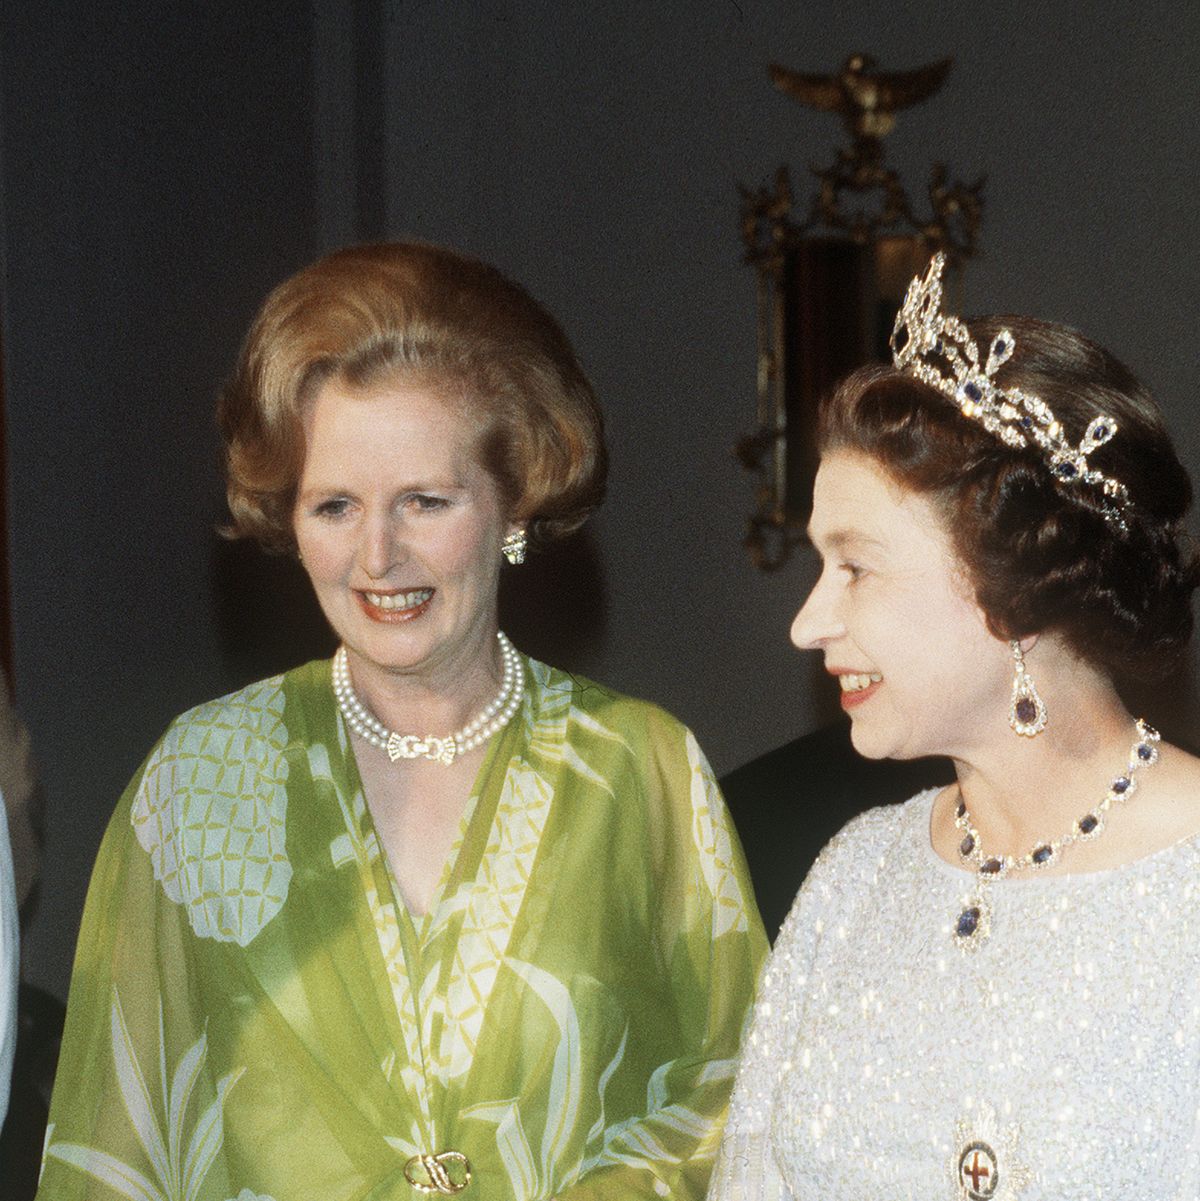 Margaret Thatcher: The Iron Lady Who Reshaped Britain